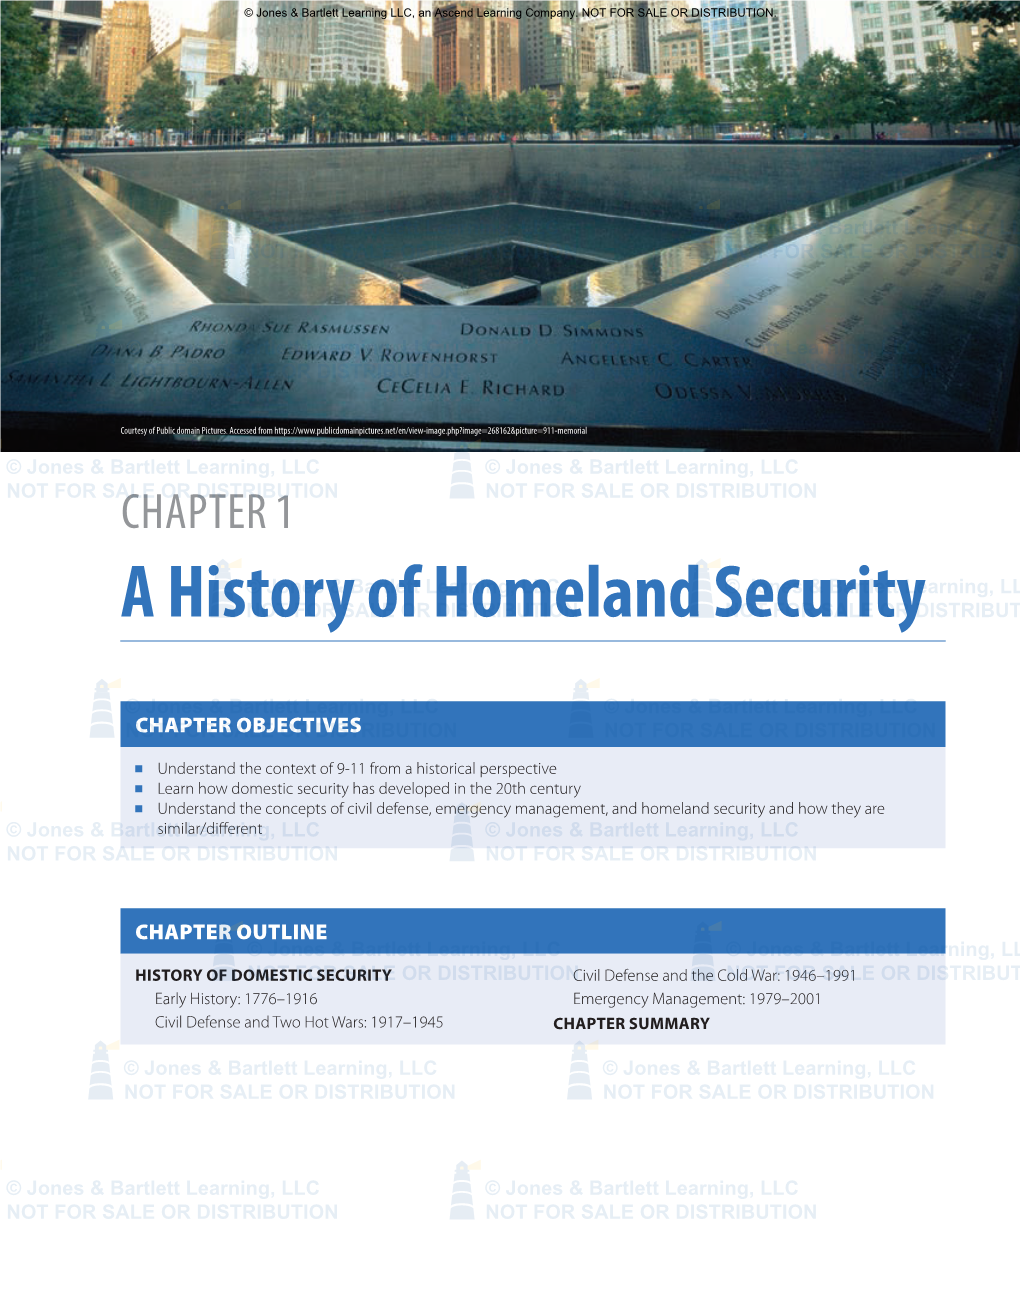 A History of Homeland Security